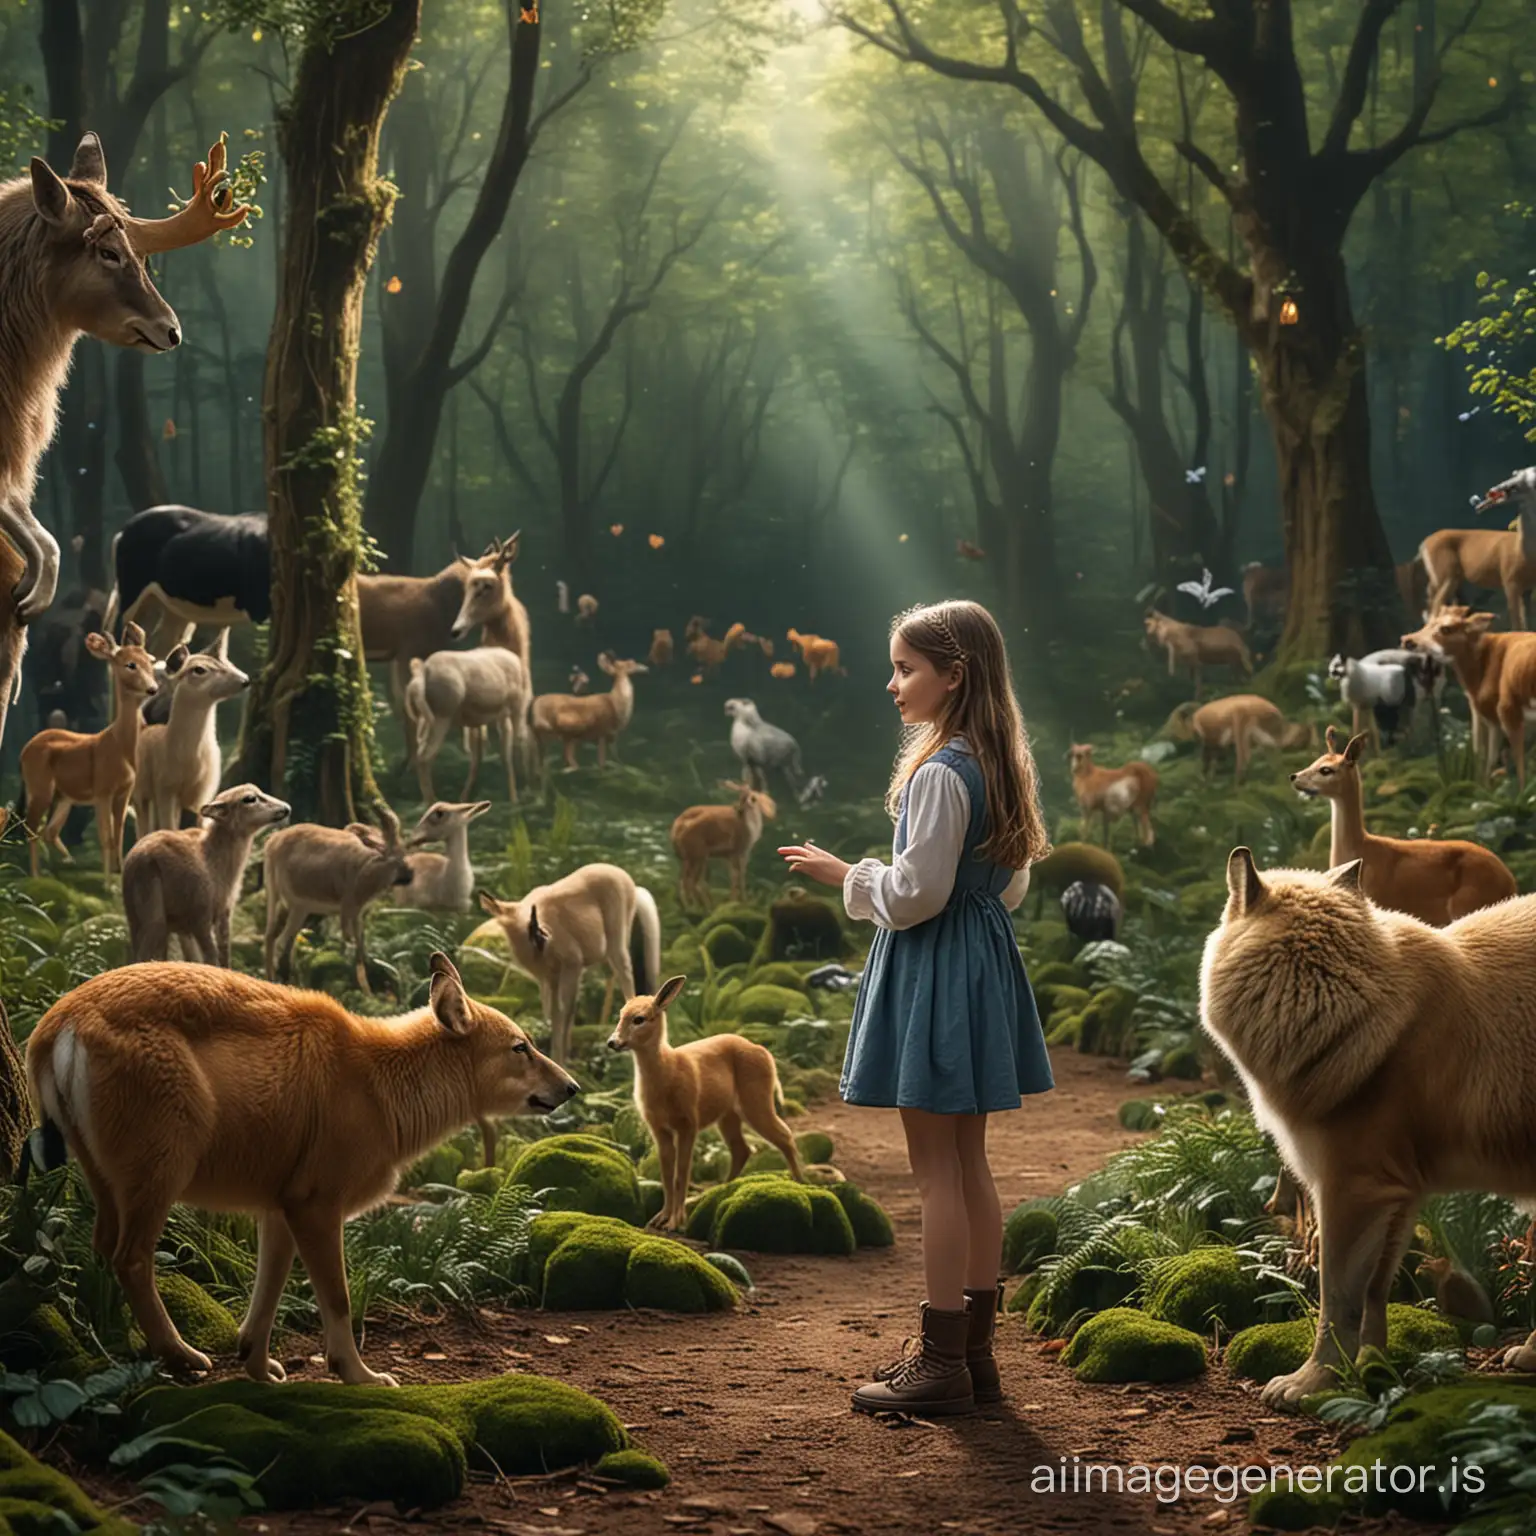 Girl-Communicating-with-Forest-Creatures-in-a-Magical-Woodland-Scene